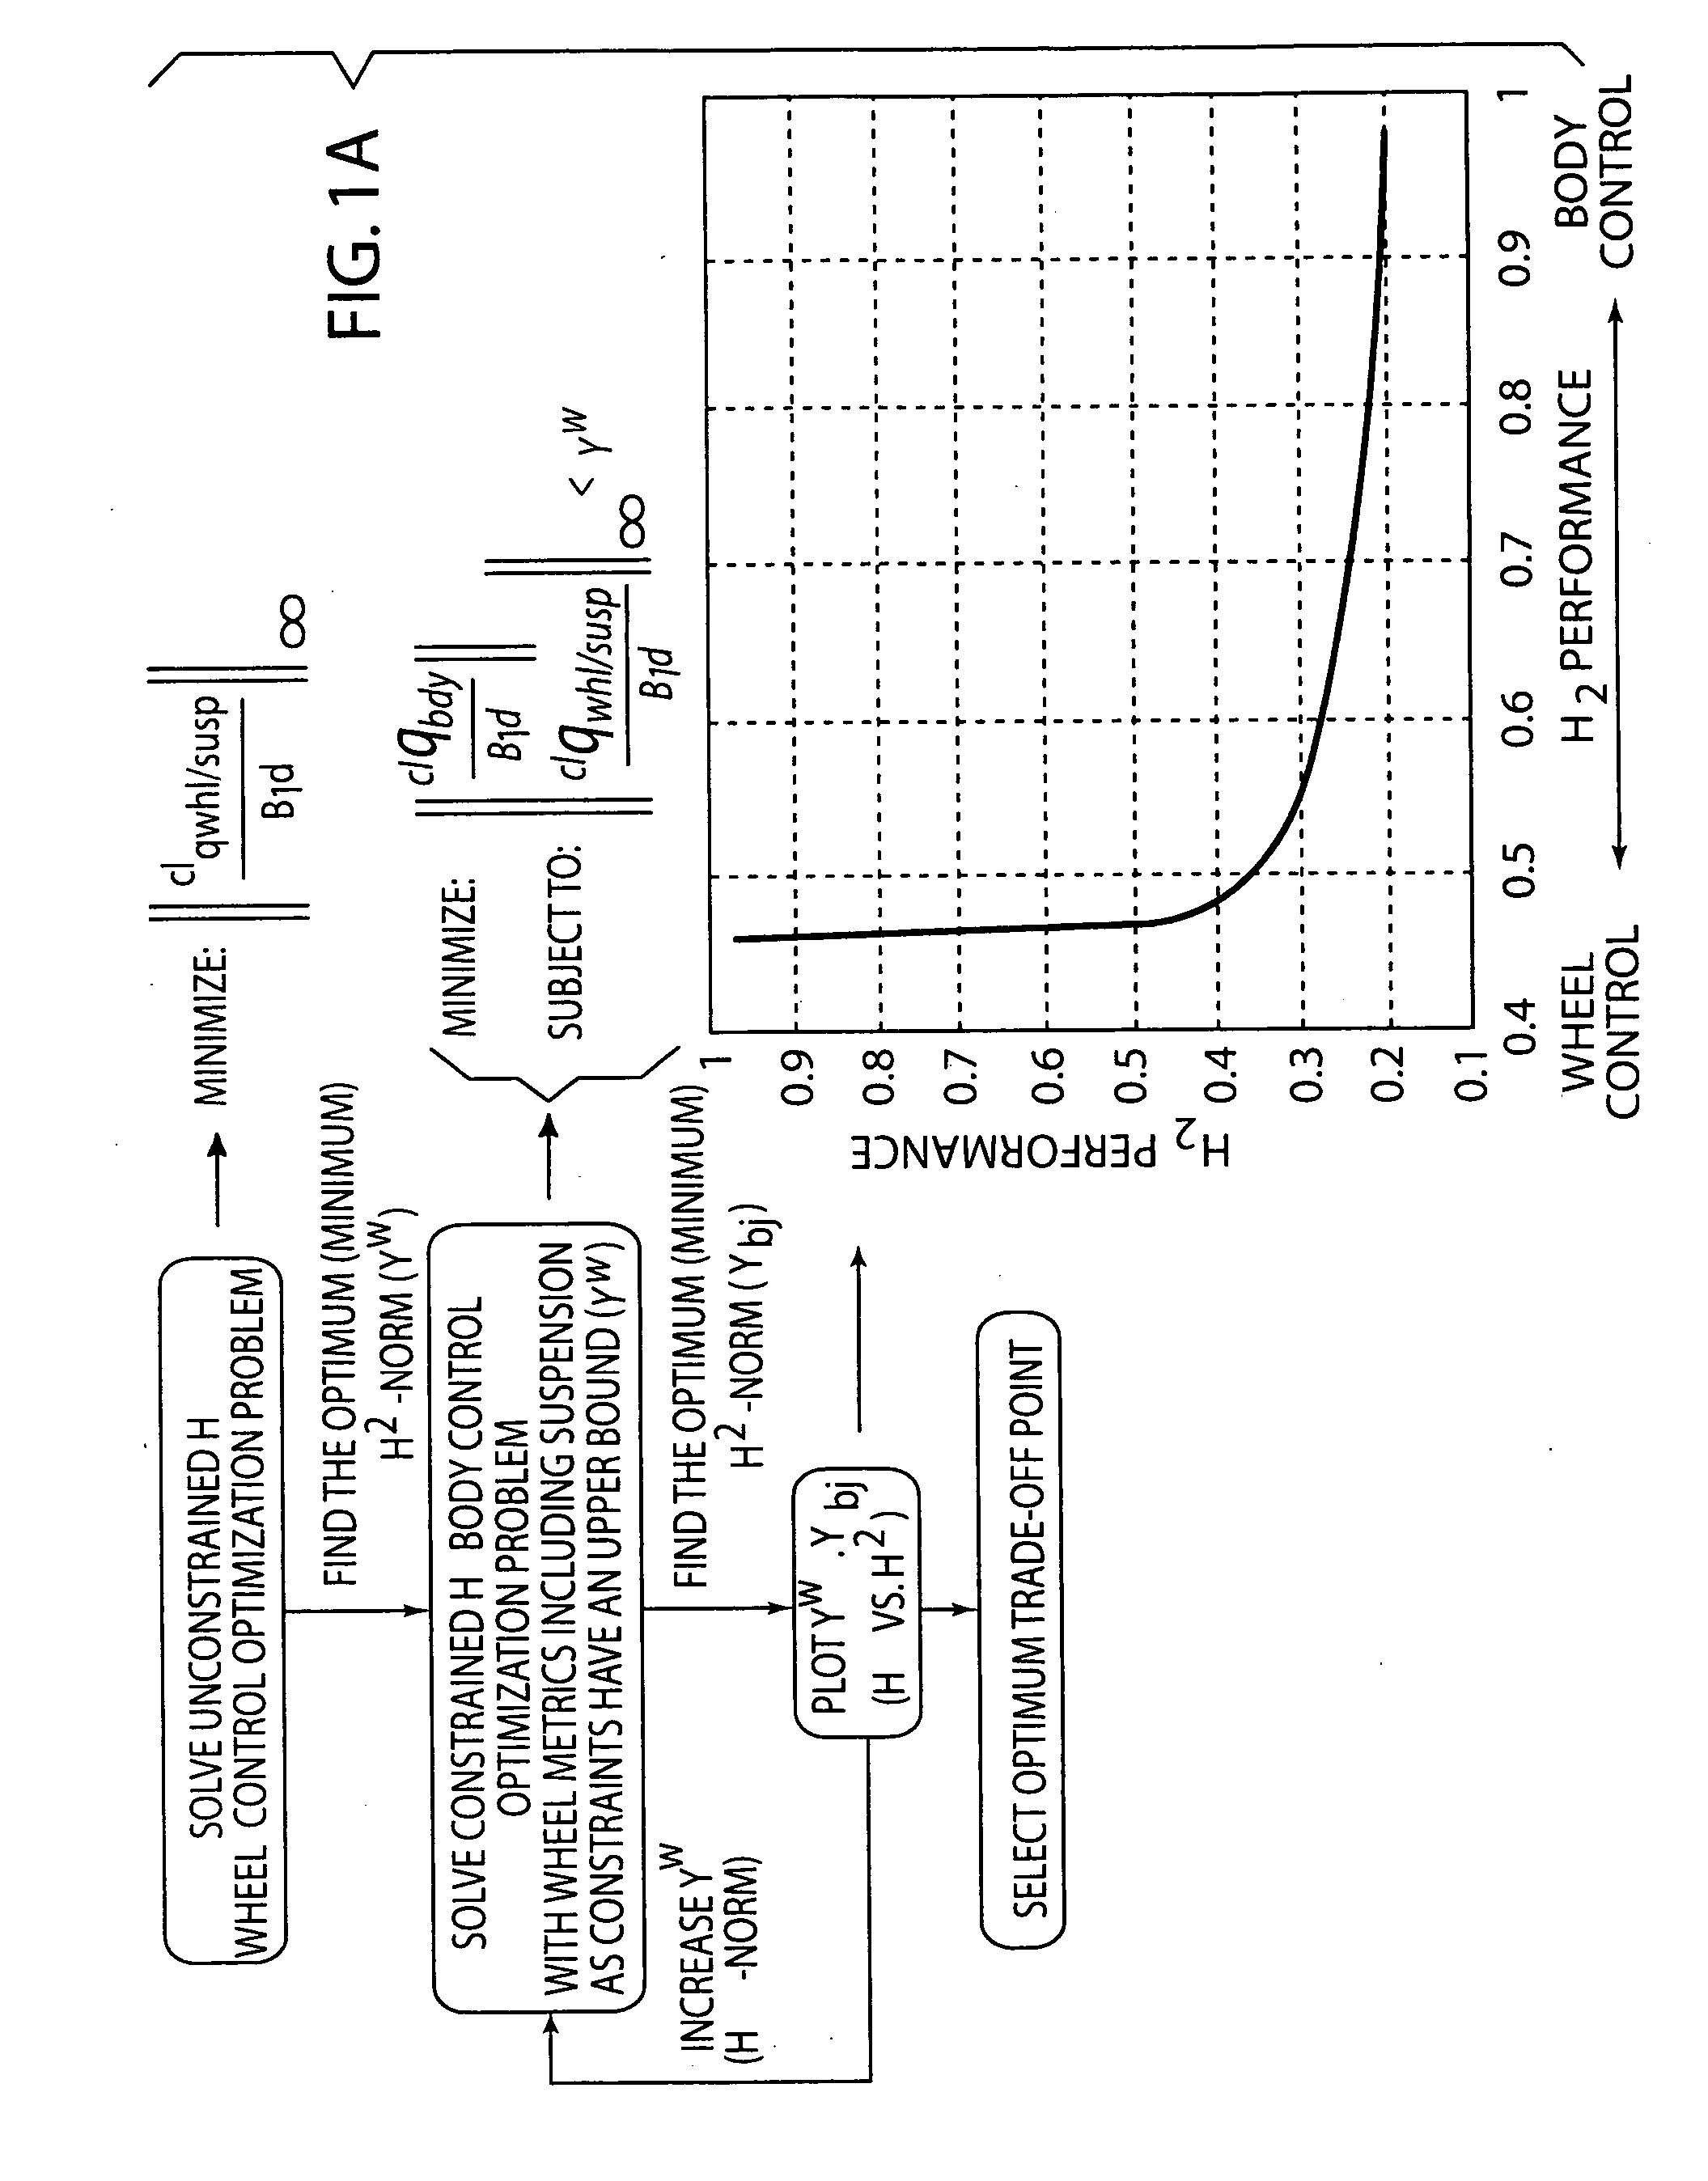 Frequency-weighted vehicle suspension control